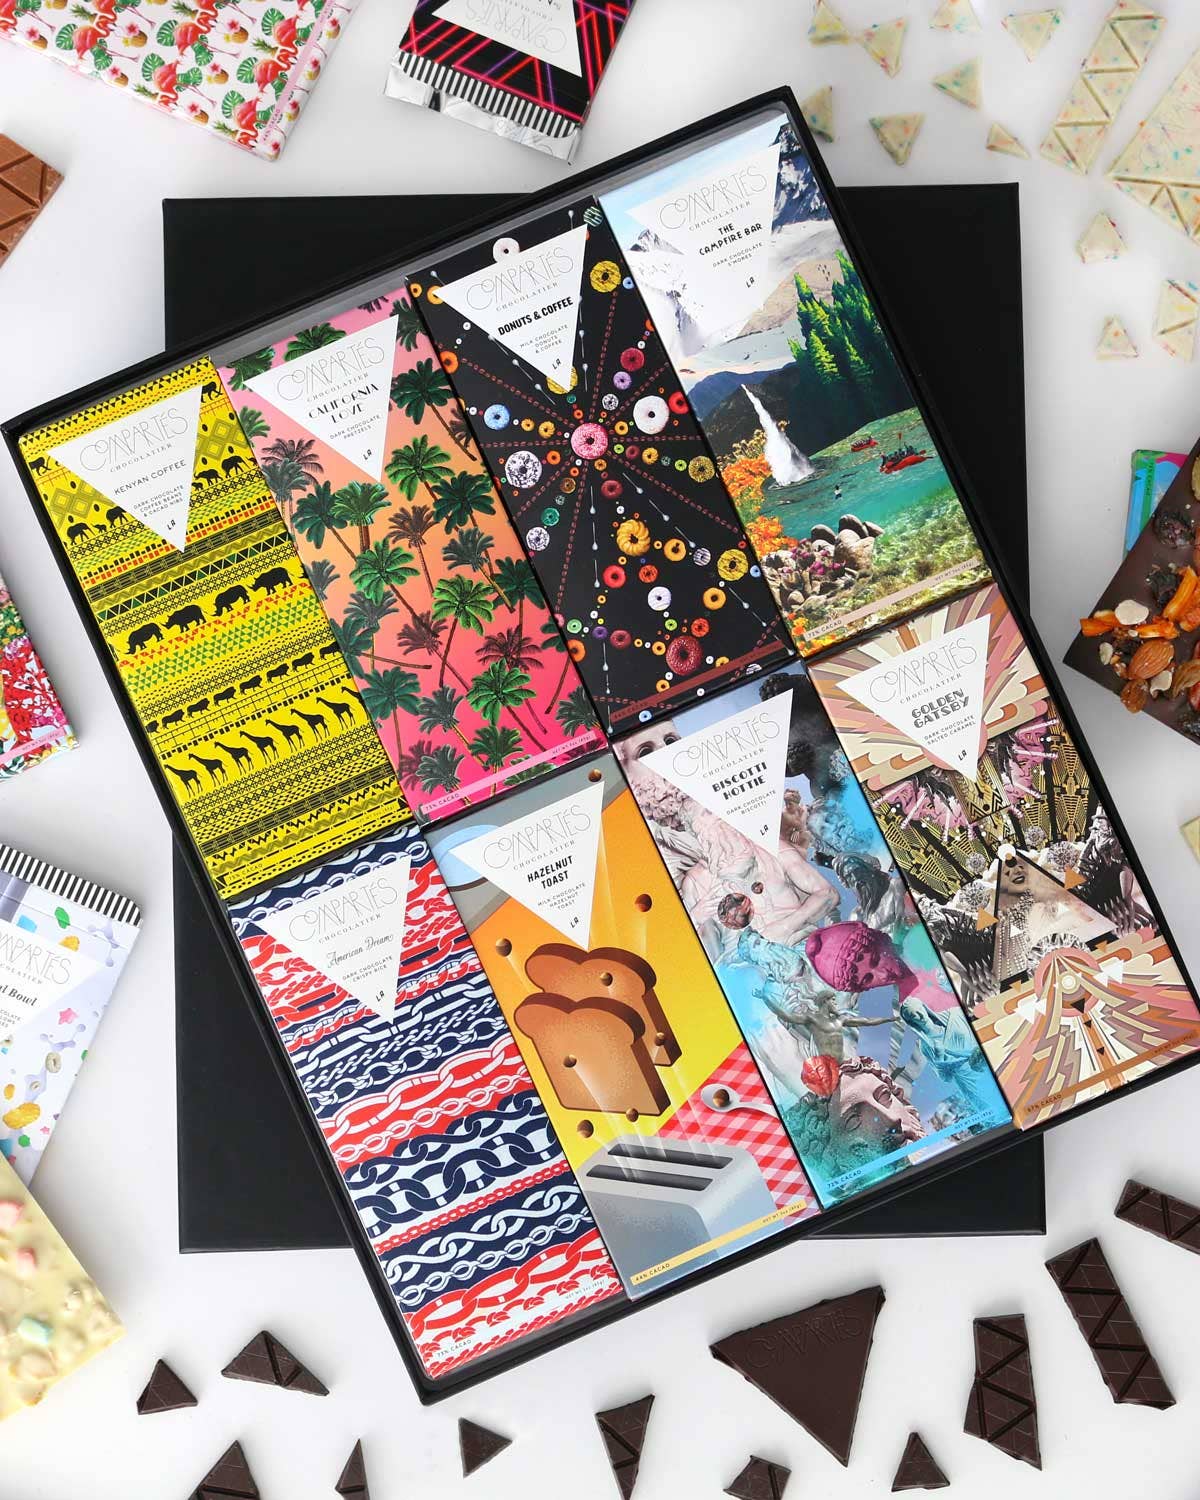 The Most Beautiful Chocolate Wrappers We’ve Ever Seen